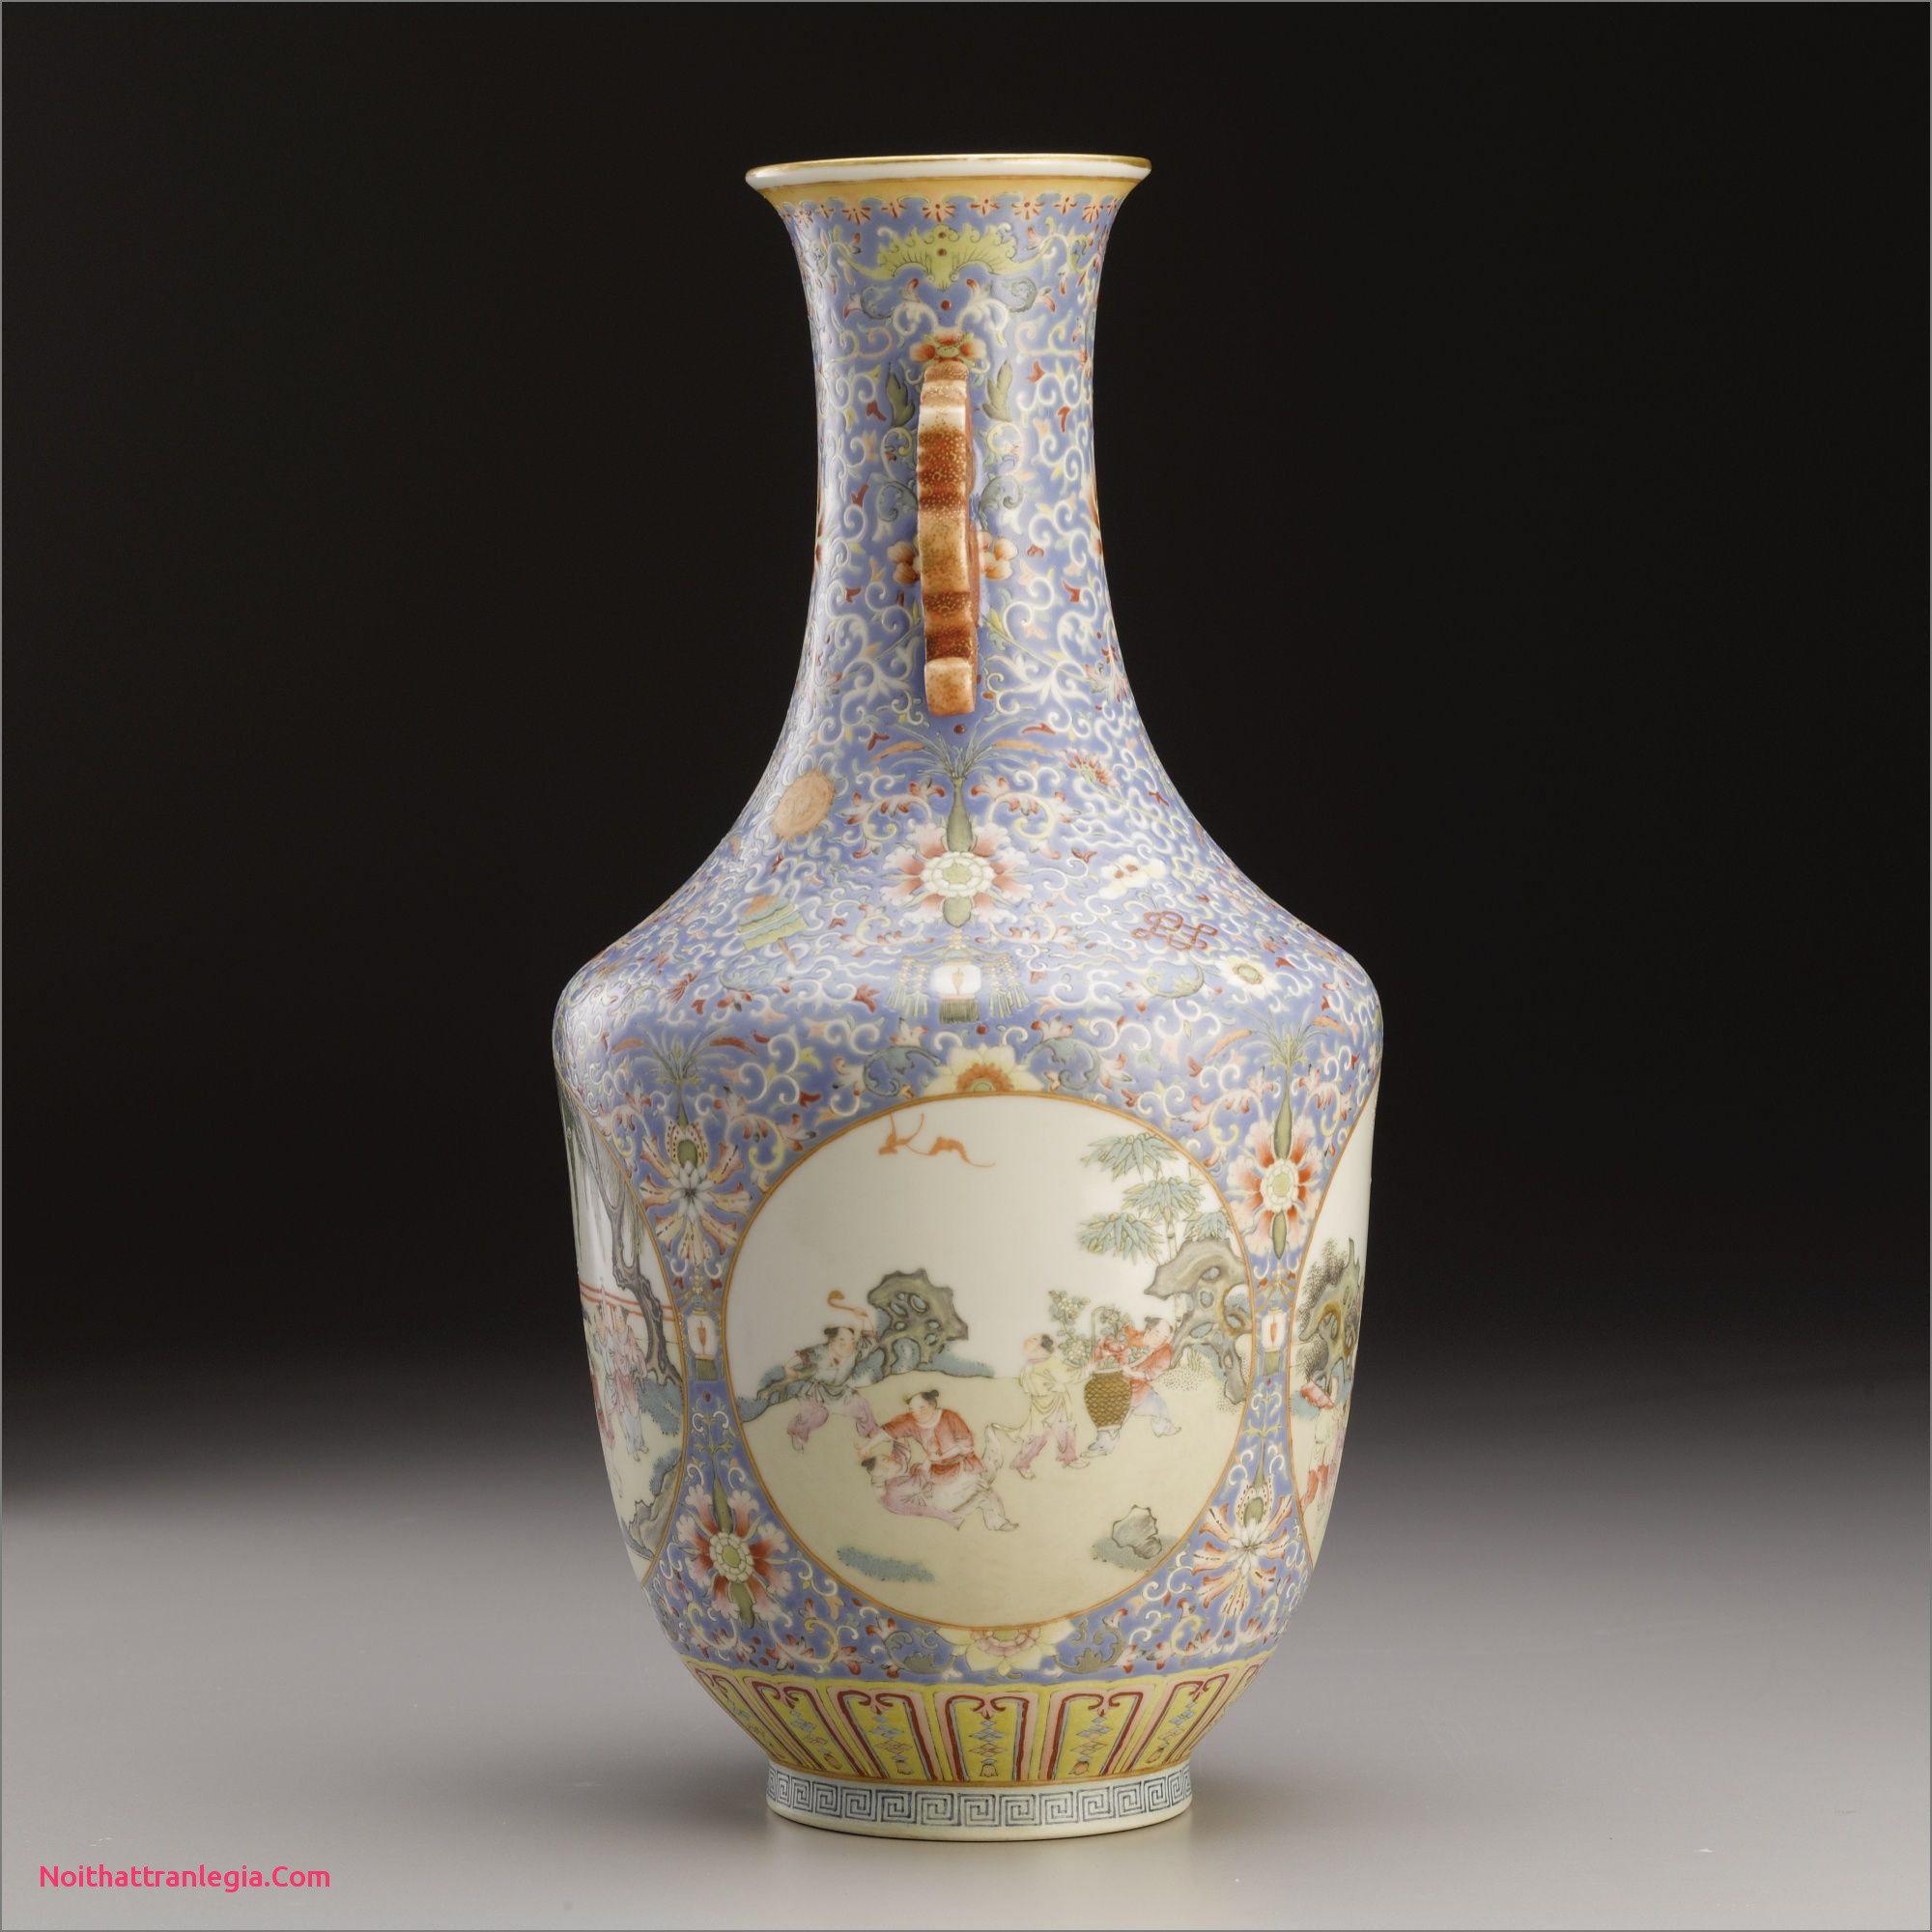 19 Amazing Old Chinese Vase Markings 2024 free download old chinese vase markings of 20 chinese antique vase noithattranlegia vases design with a fine blue ground famille rose vase qing dynasty daoguang